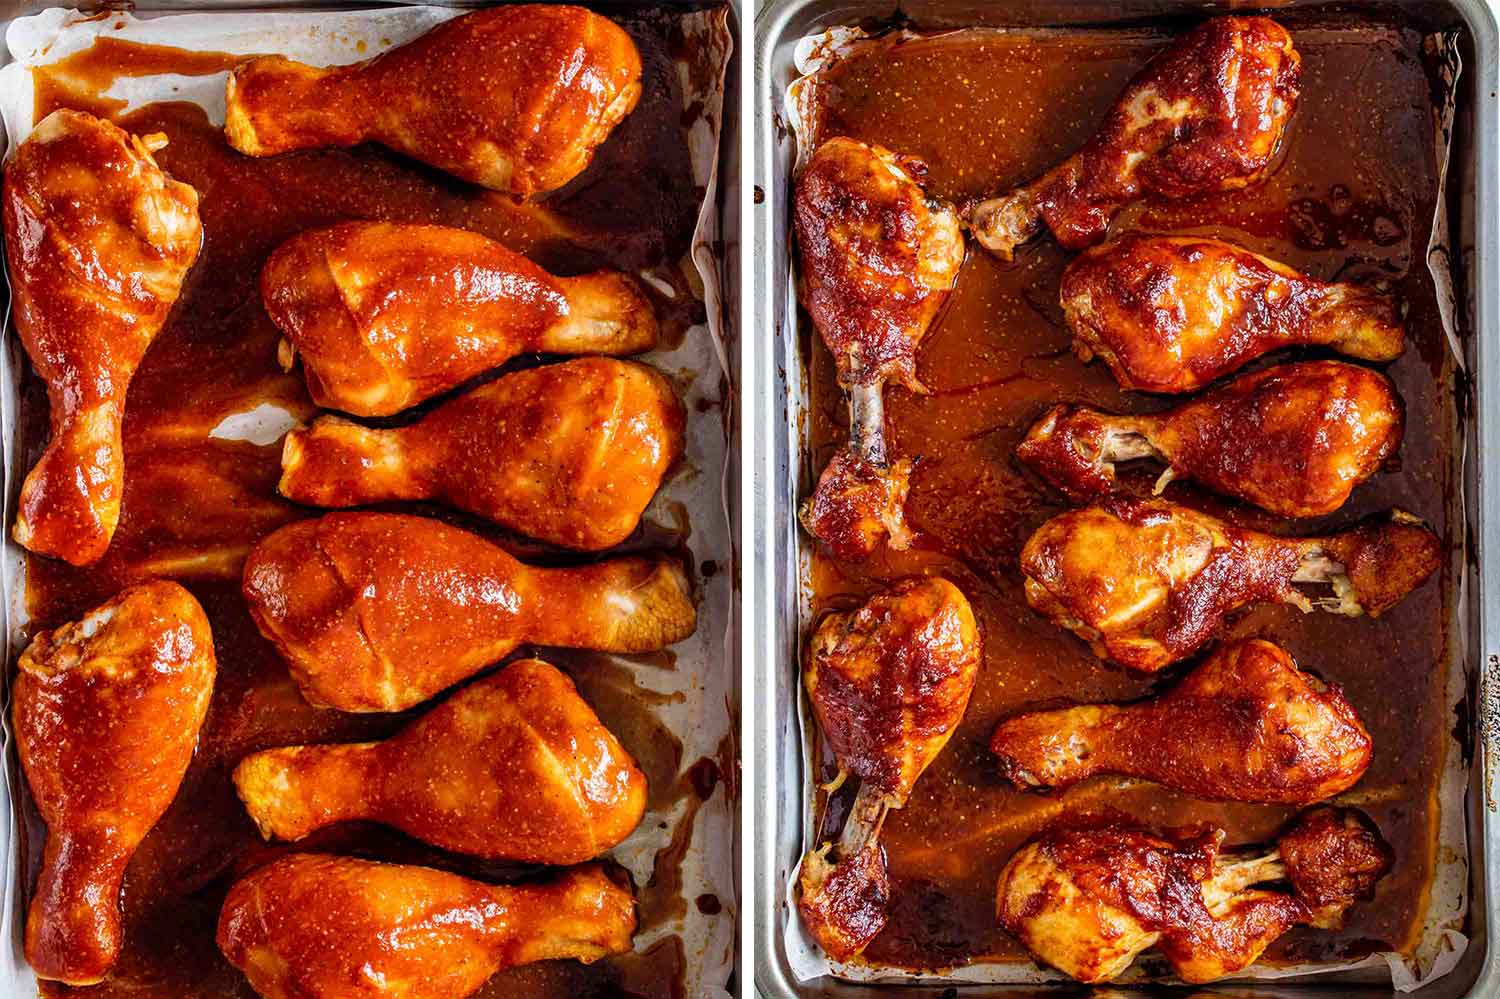 baked bbq chicken drumsticks before and after baking.